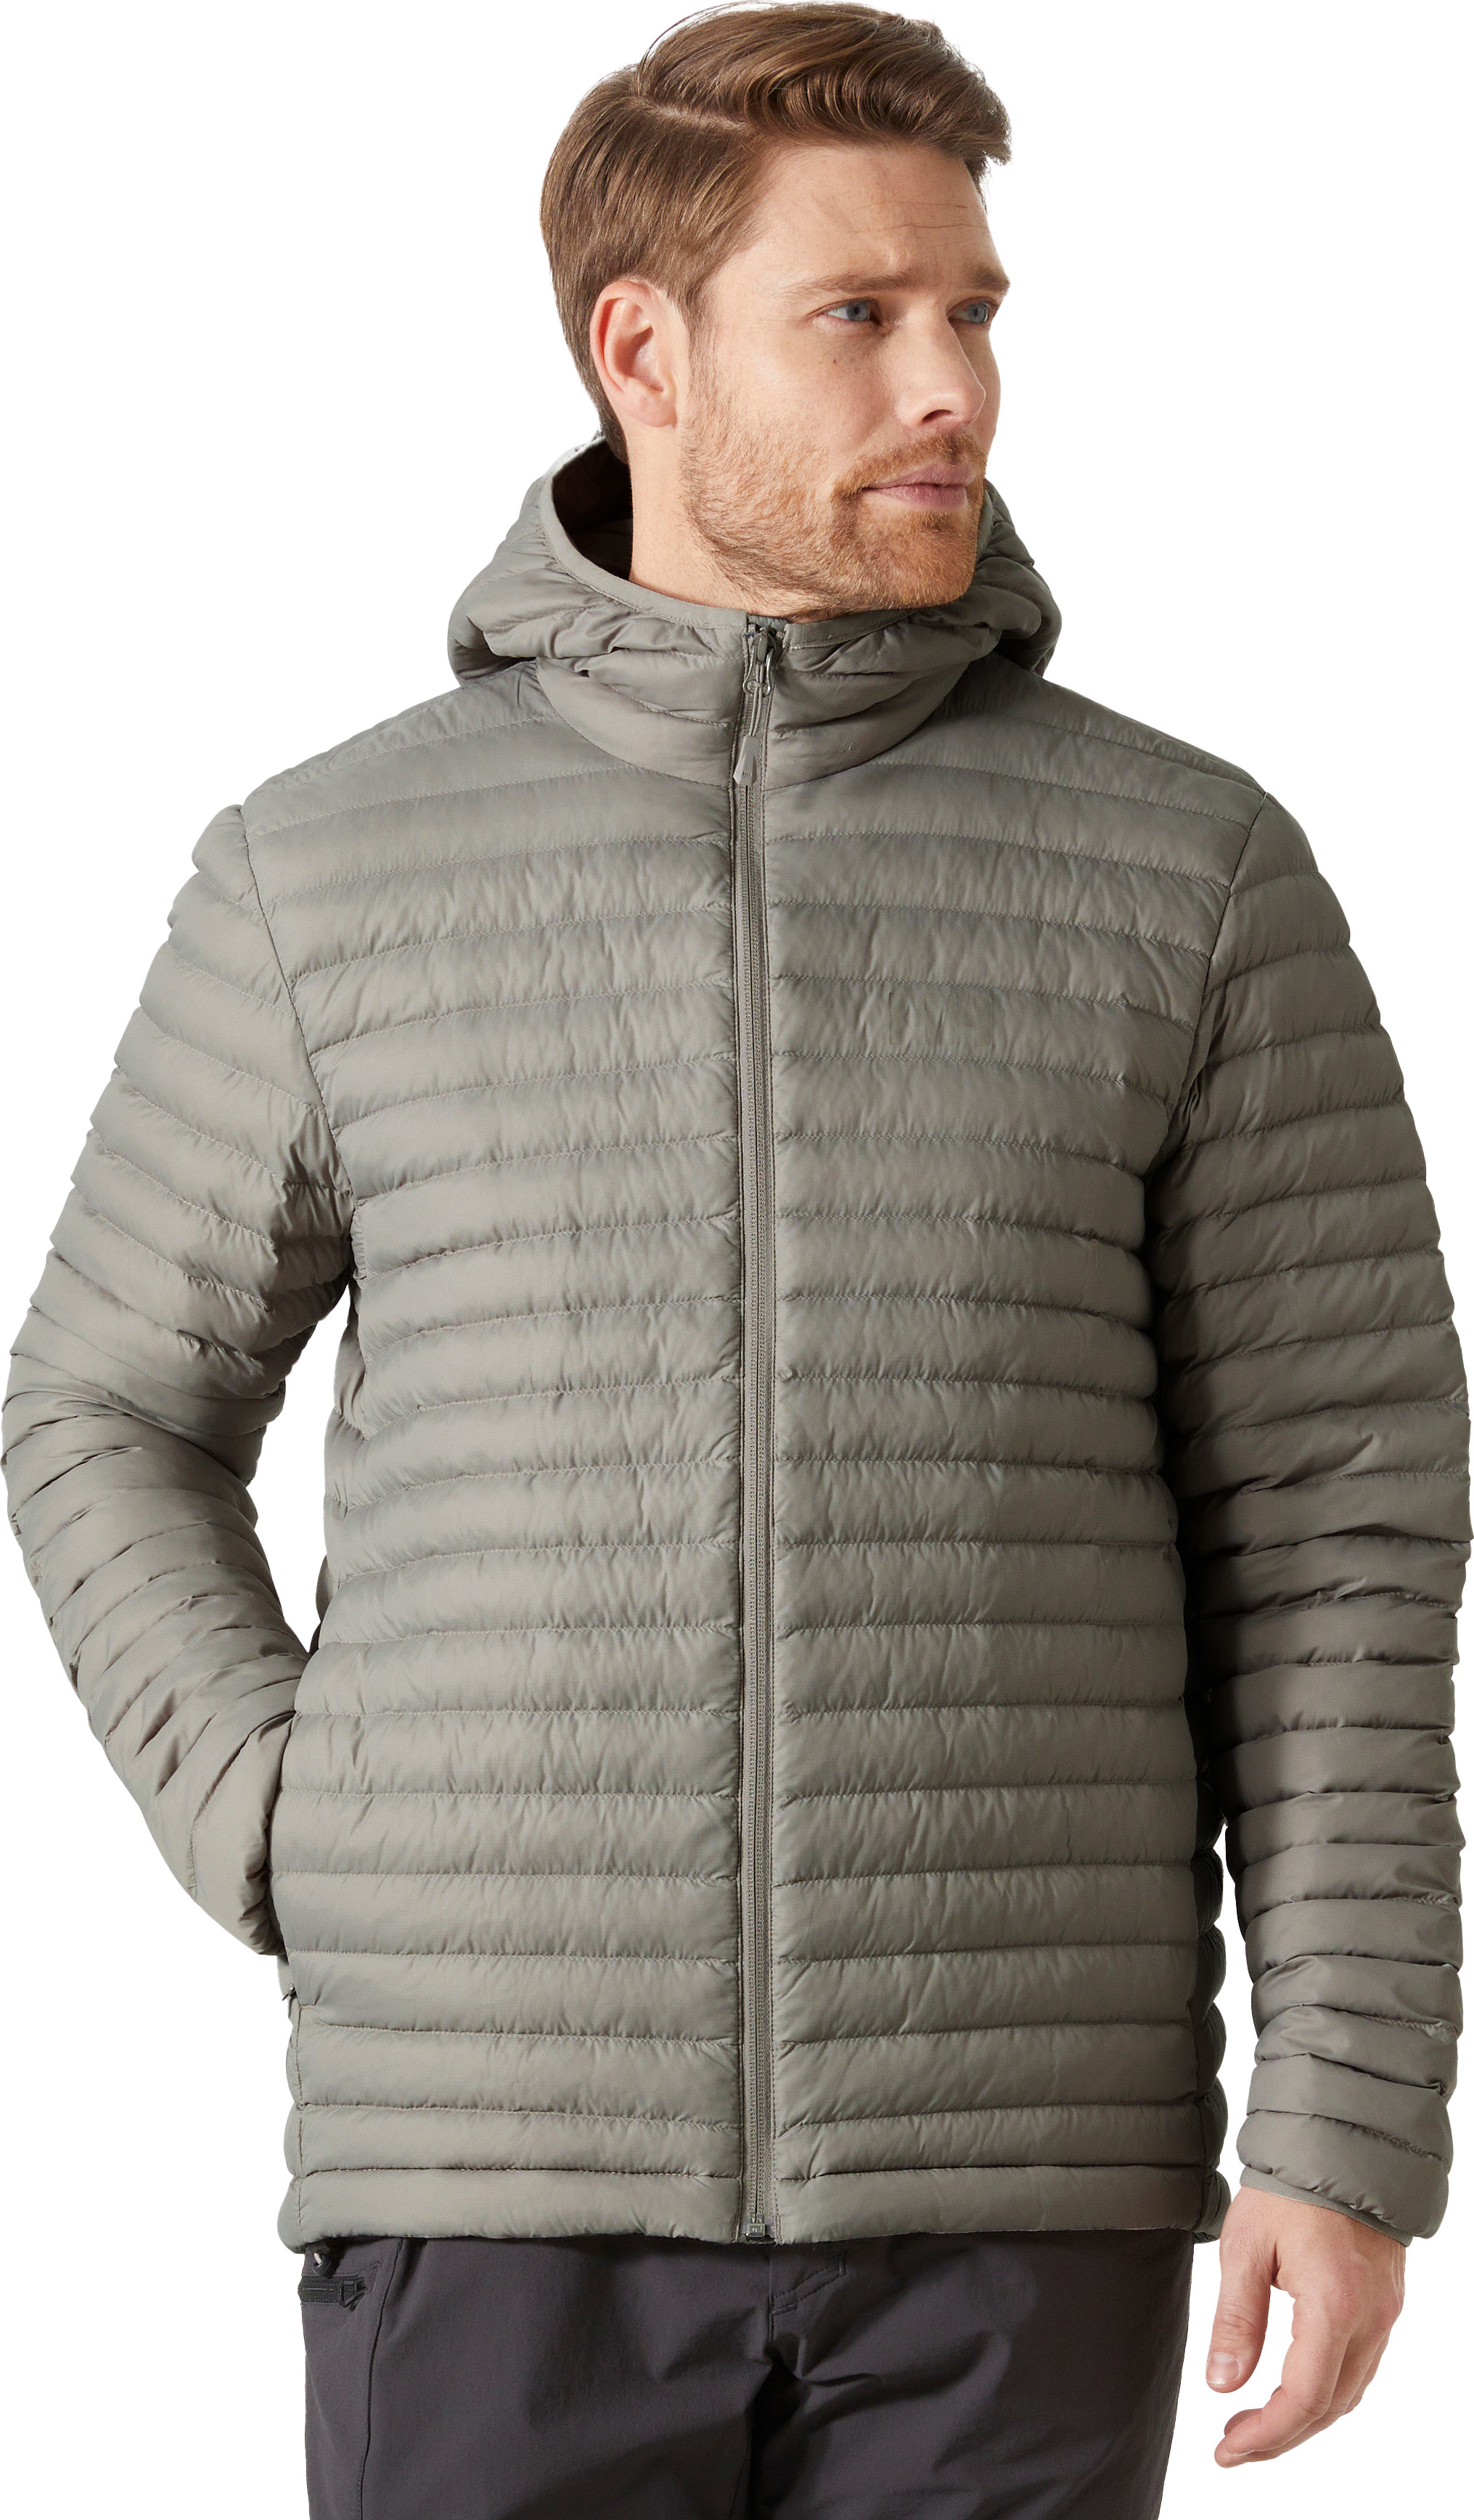 Men’s Sirdal Hooded Insulated Jacket Terrazzo